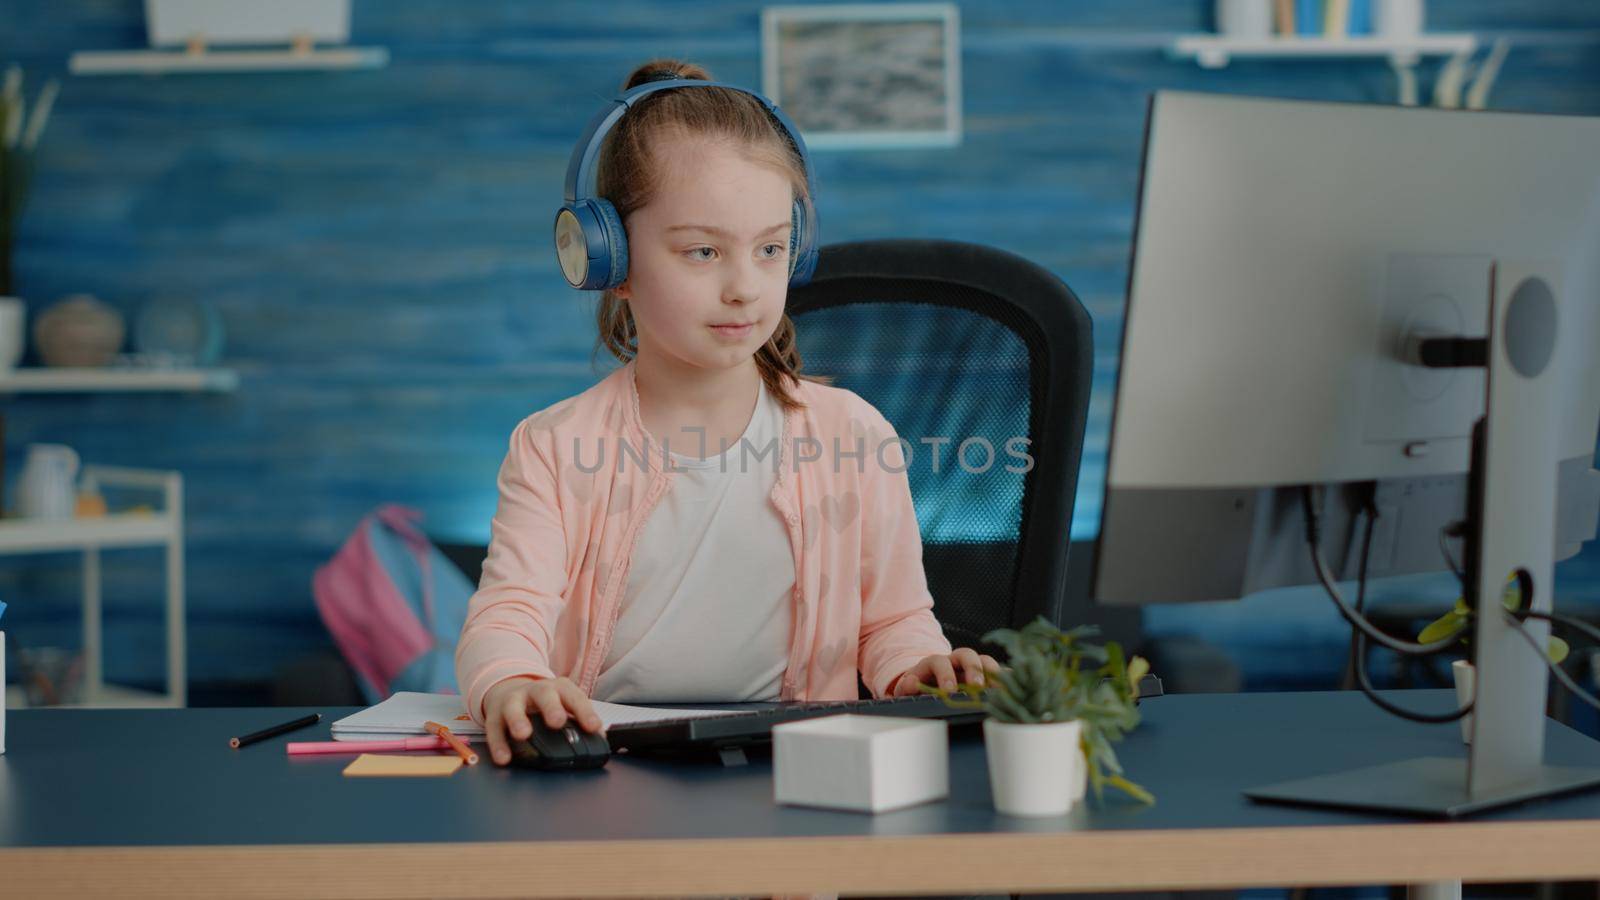 Young child wearing headphones and drawing on textbook with pencils at desk. Little girl listening to music and using computer while having notebook to draw after online school classes